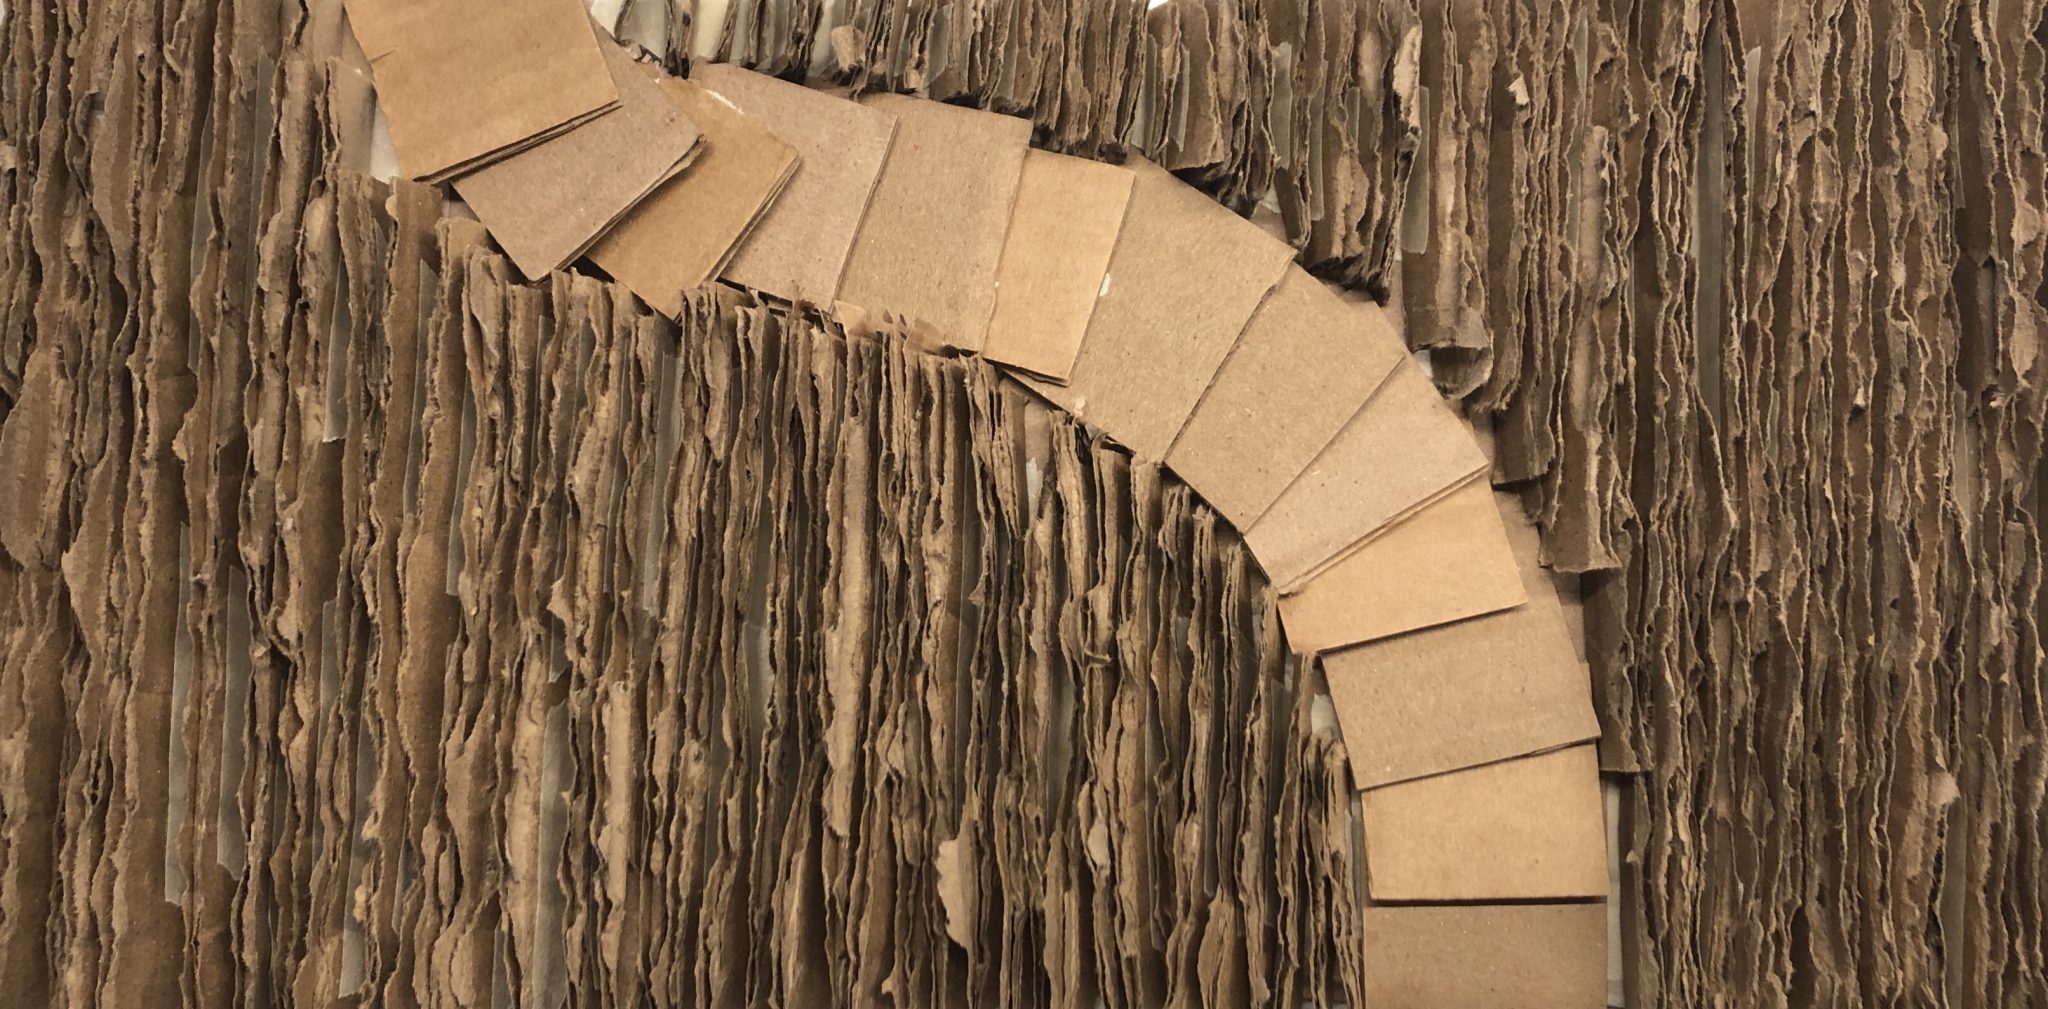 Cardboard Landscape Inspired by the Work of Carlos Bunga